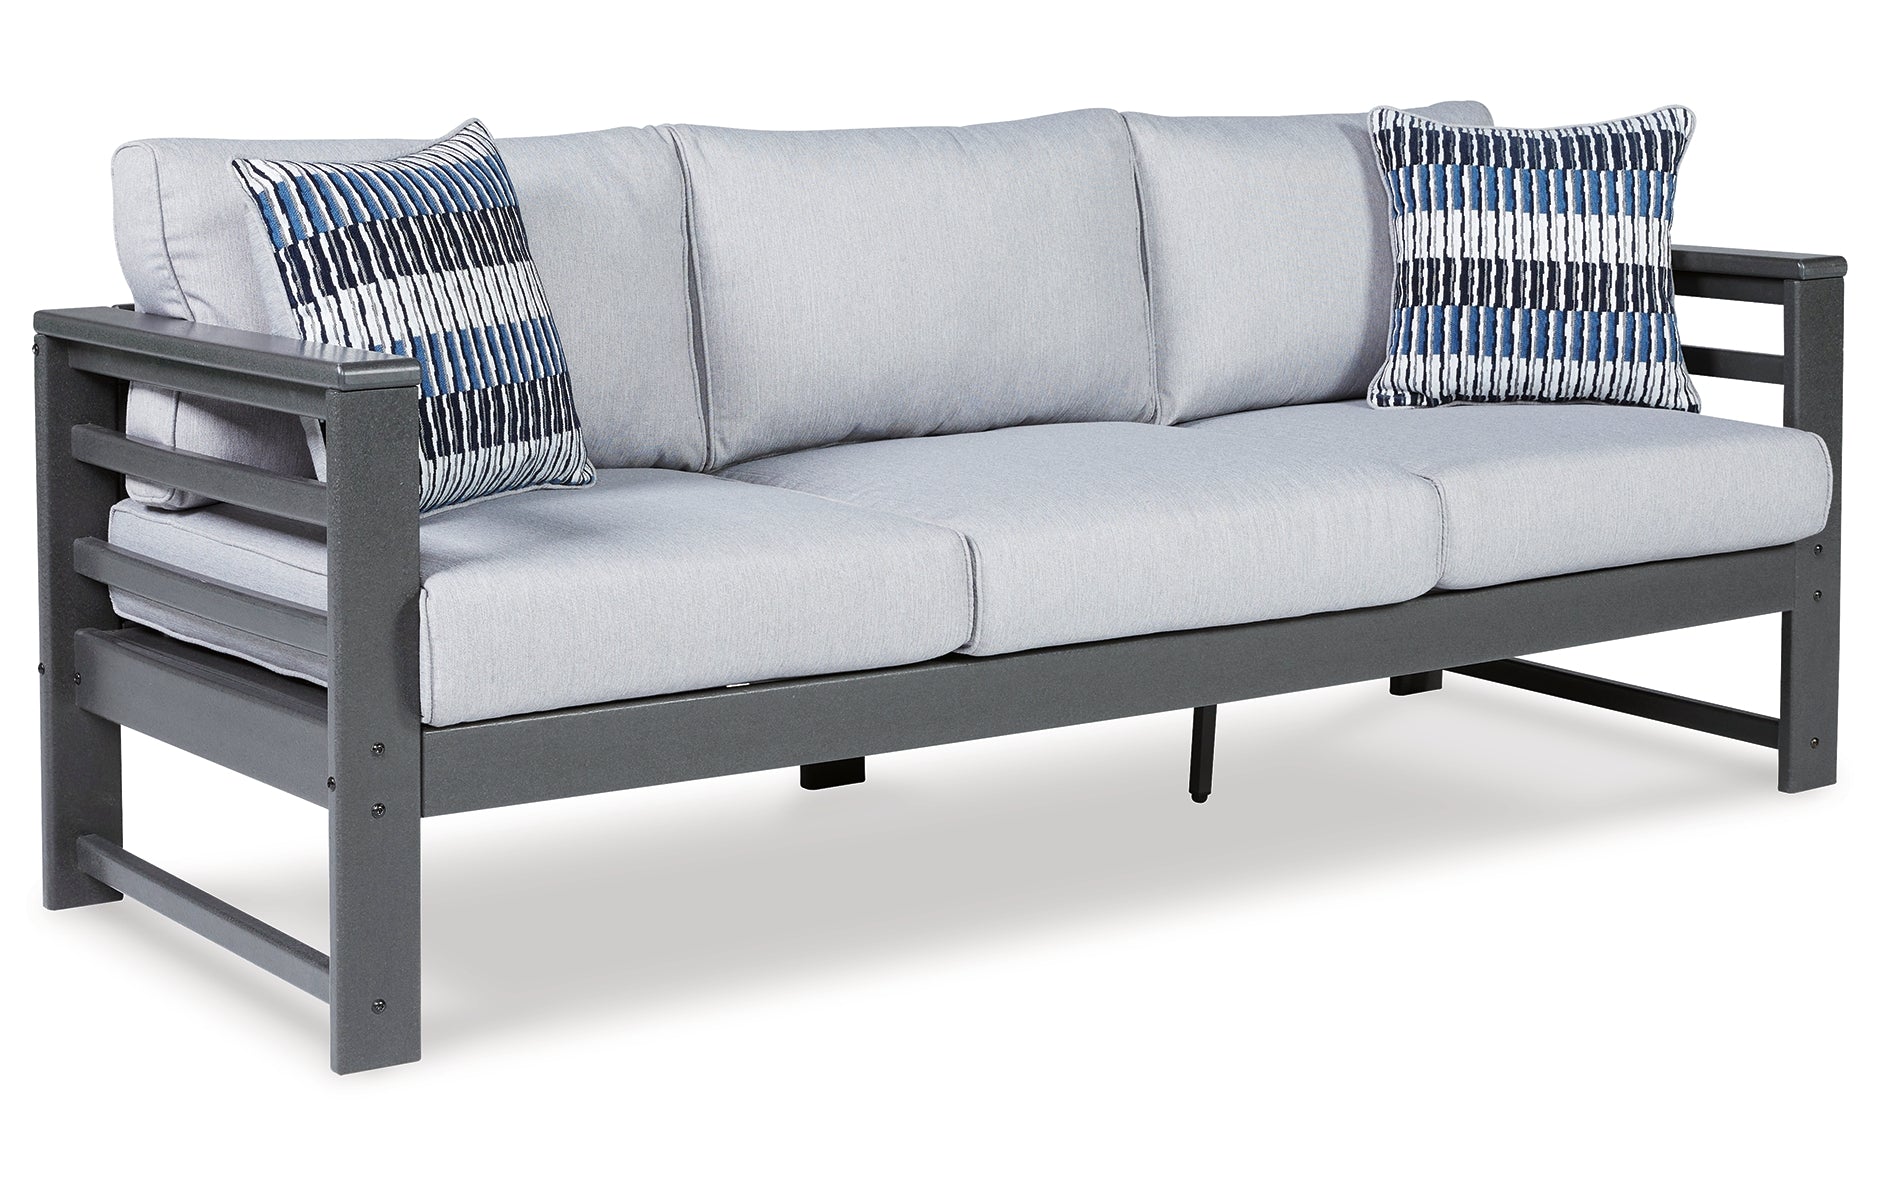 Amora Outdoor Sofa and Loveseat with Coffee Table and 2 End Tables